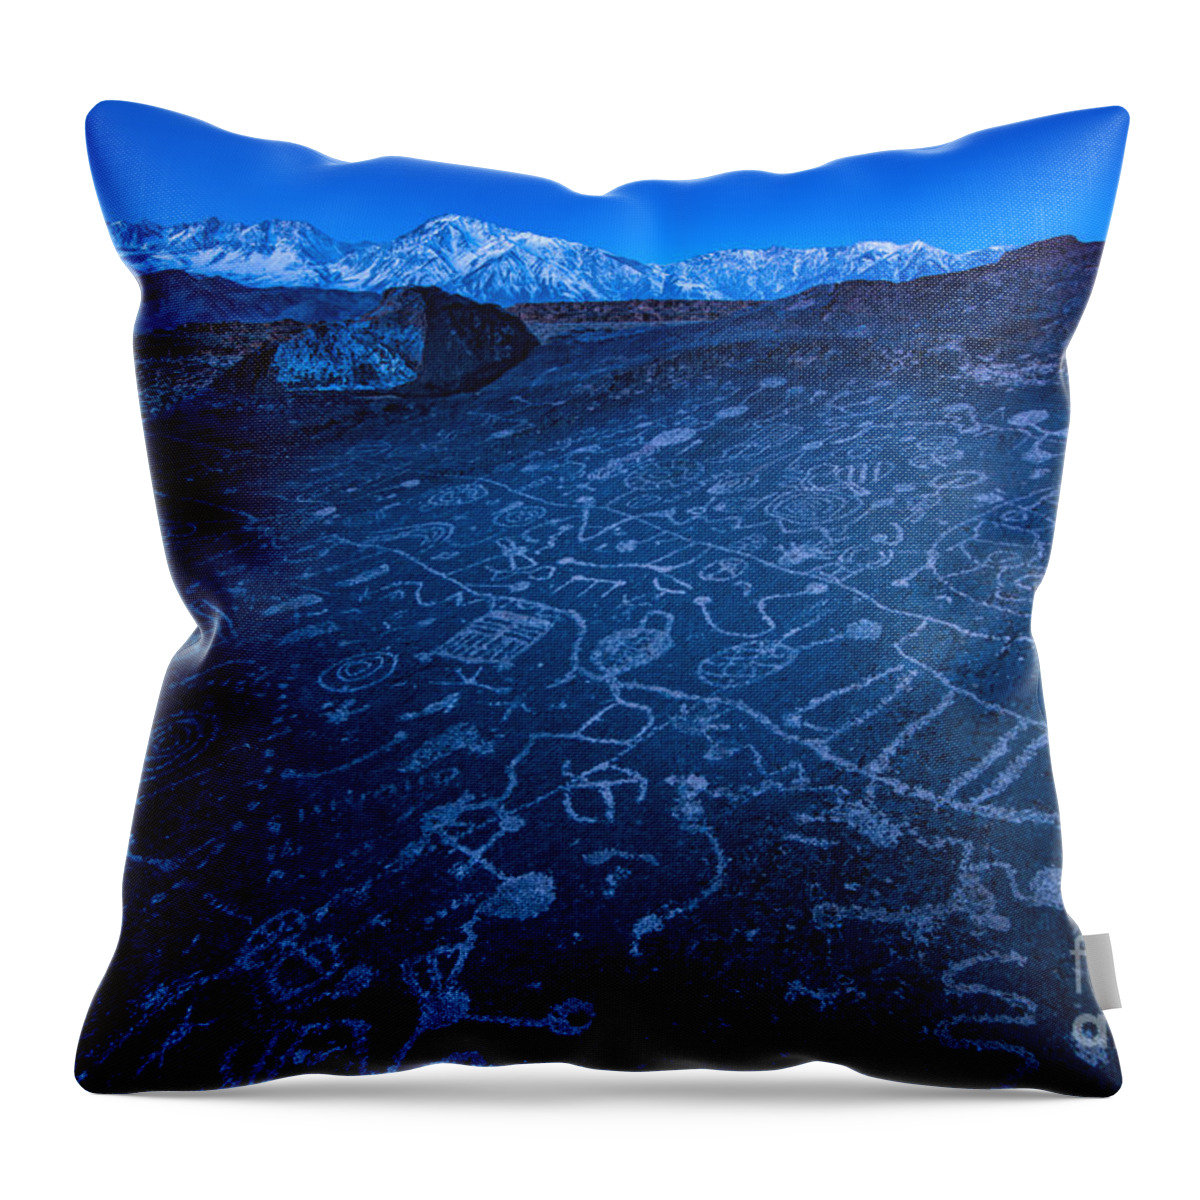 Petroglyph Throw Pillow featuring the photograph Sunrise on Sky Rock Petroglyph and Sierra Nevada Mountains by Gary Whitton